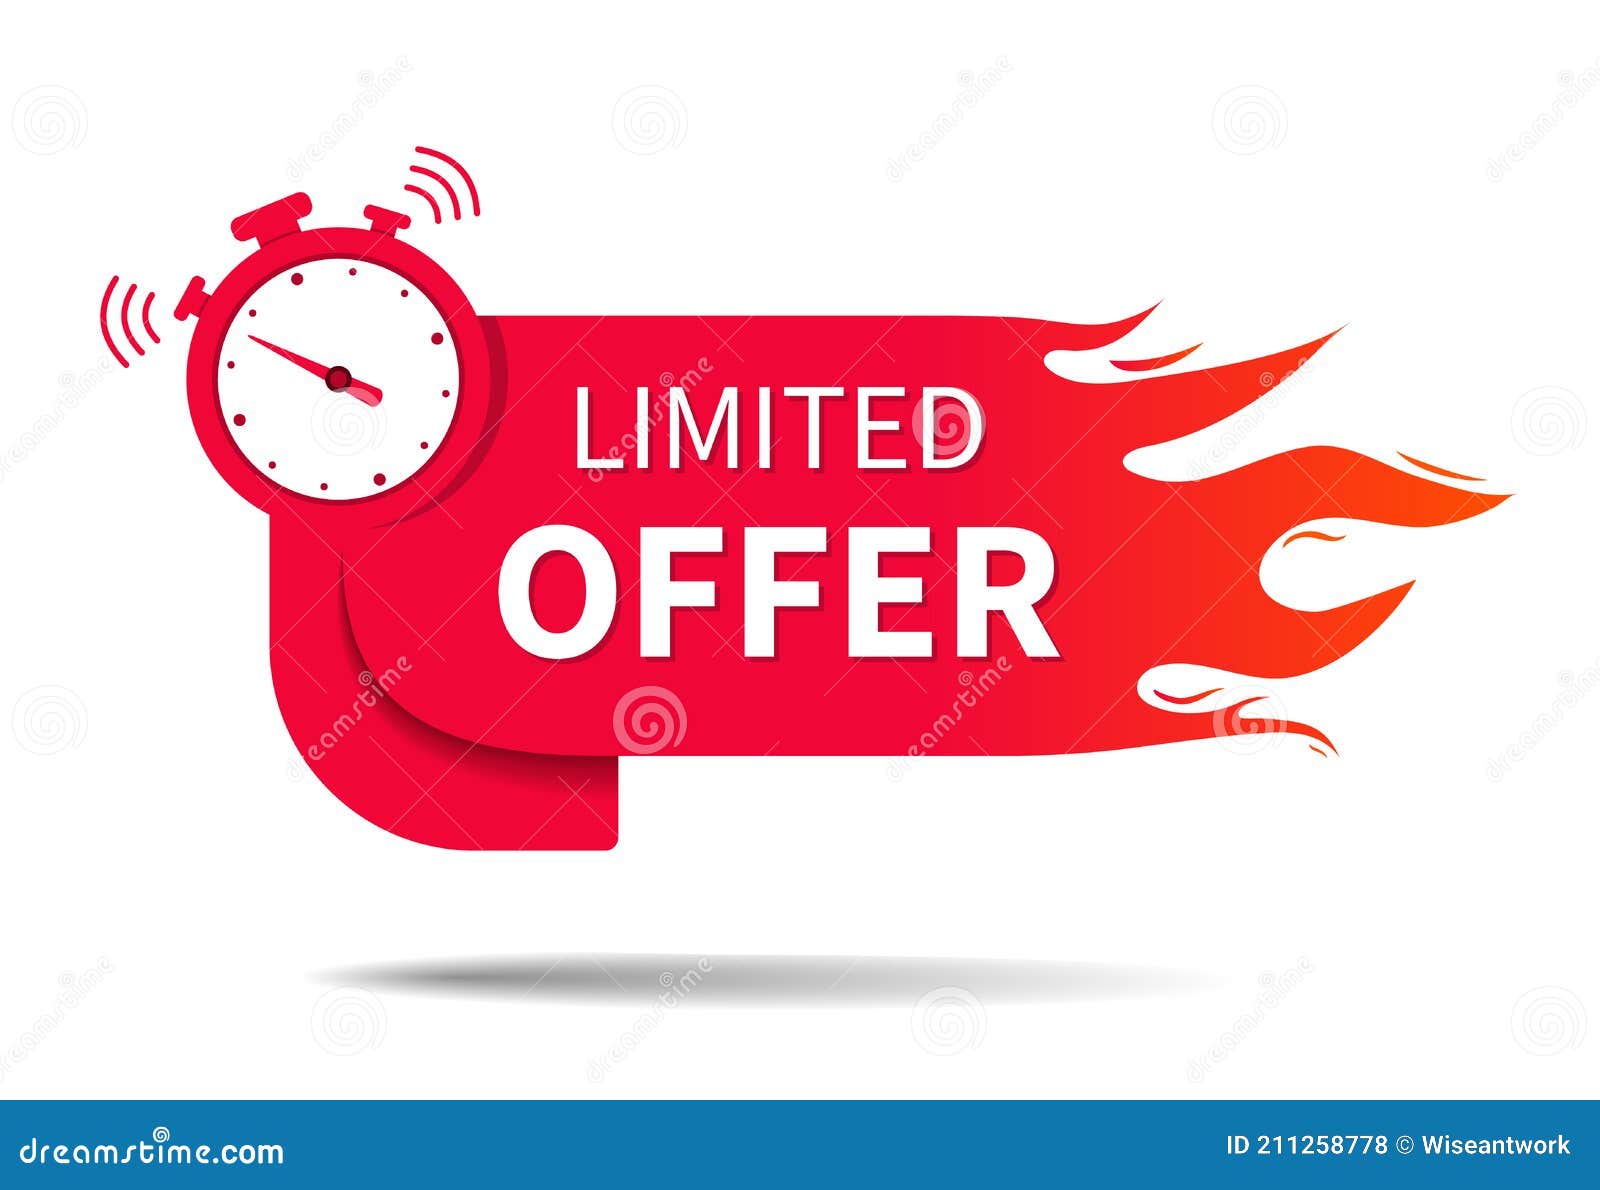 https://thumbs.dreamstime.com/z/limited-offer-banner-sale-clock-fire-countdown-hot-time-discount-icon-promo-deal-label-logo-button-exclusive-211258778.jpg